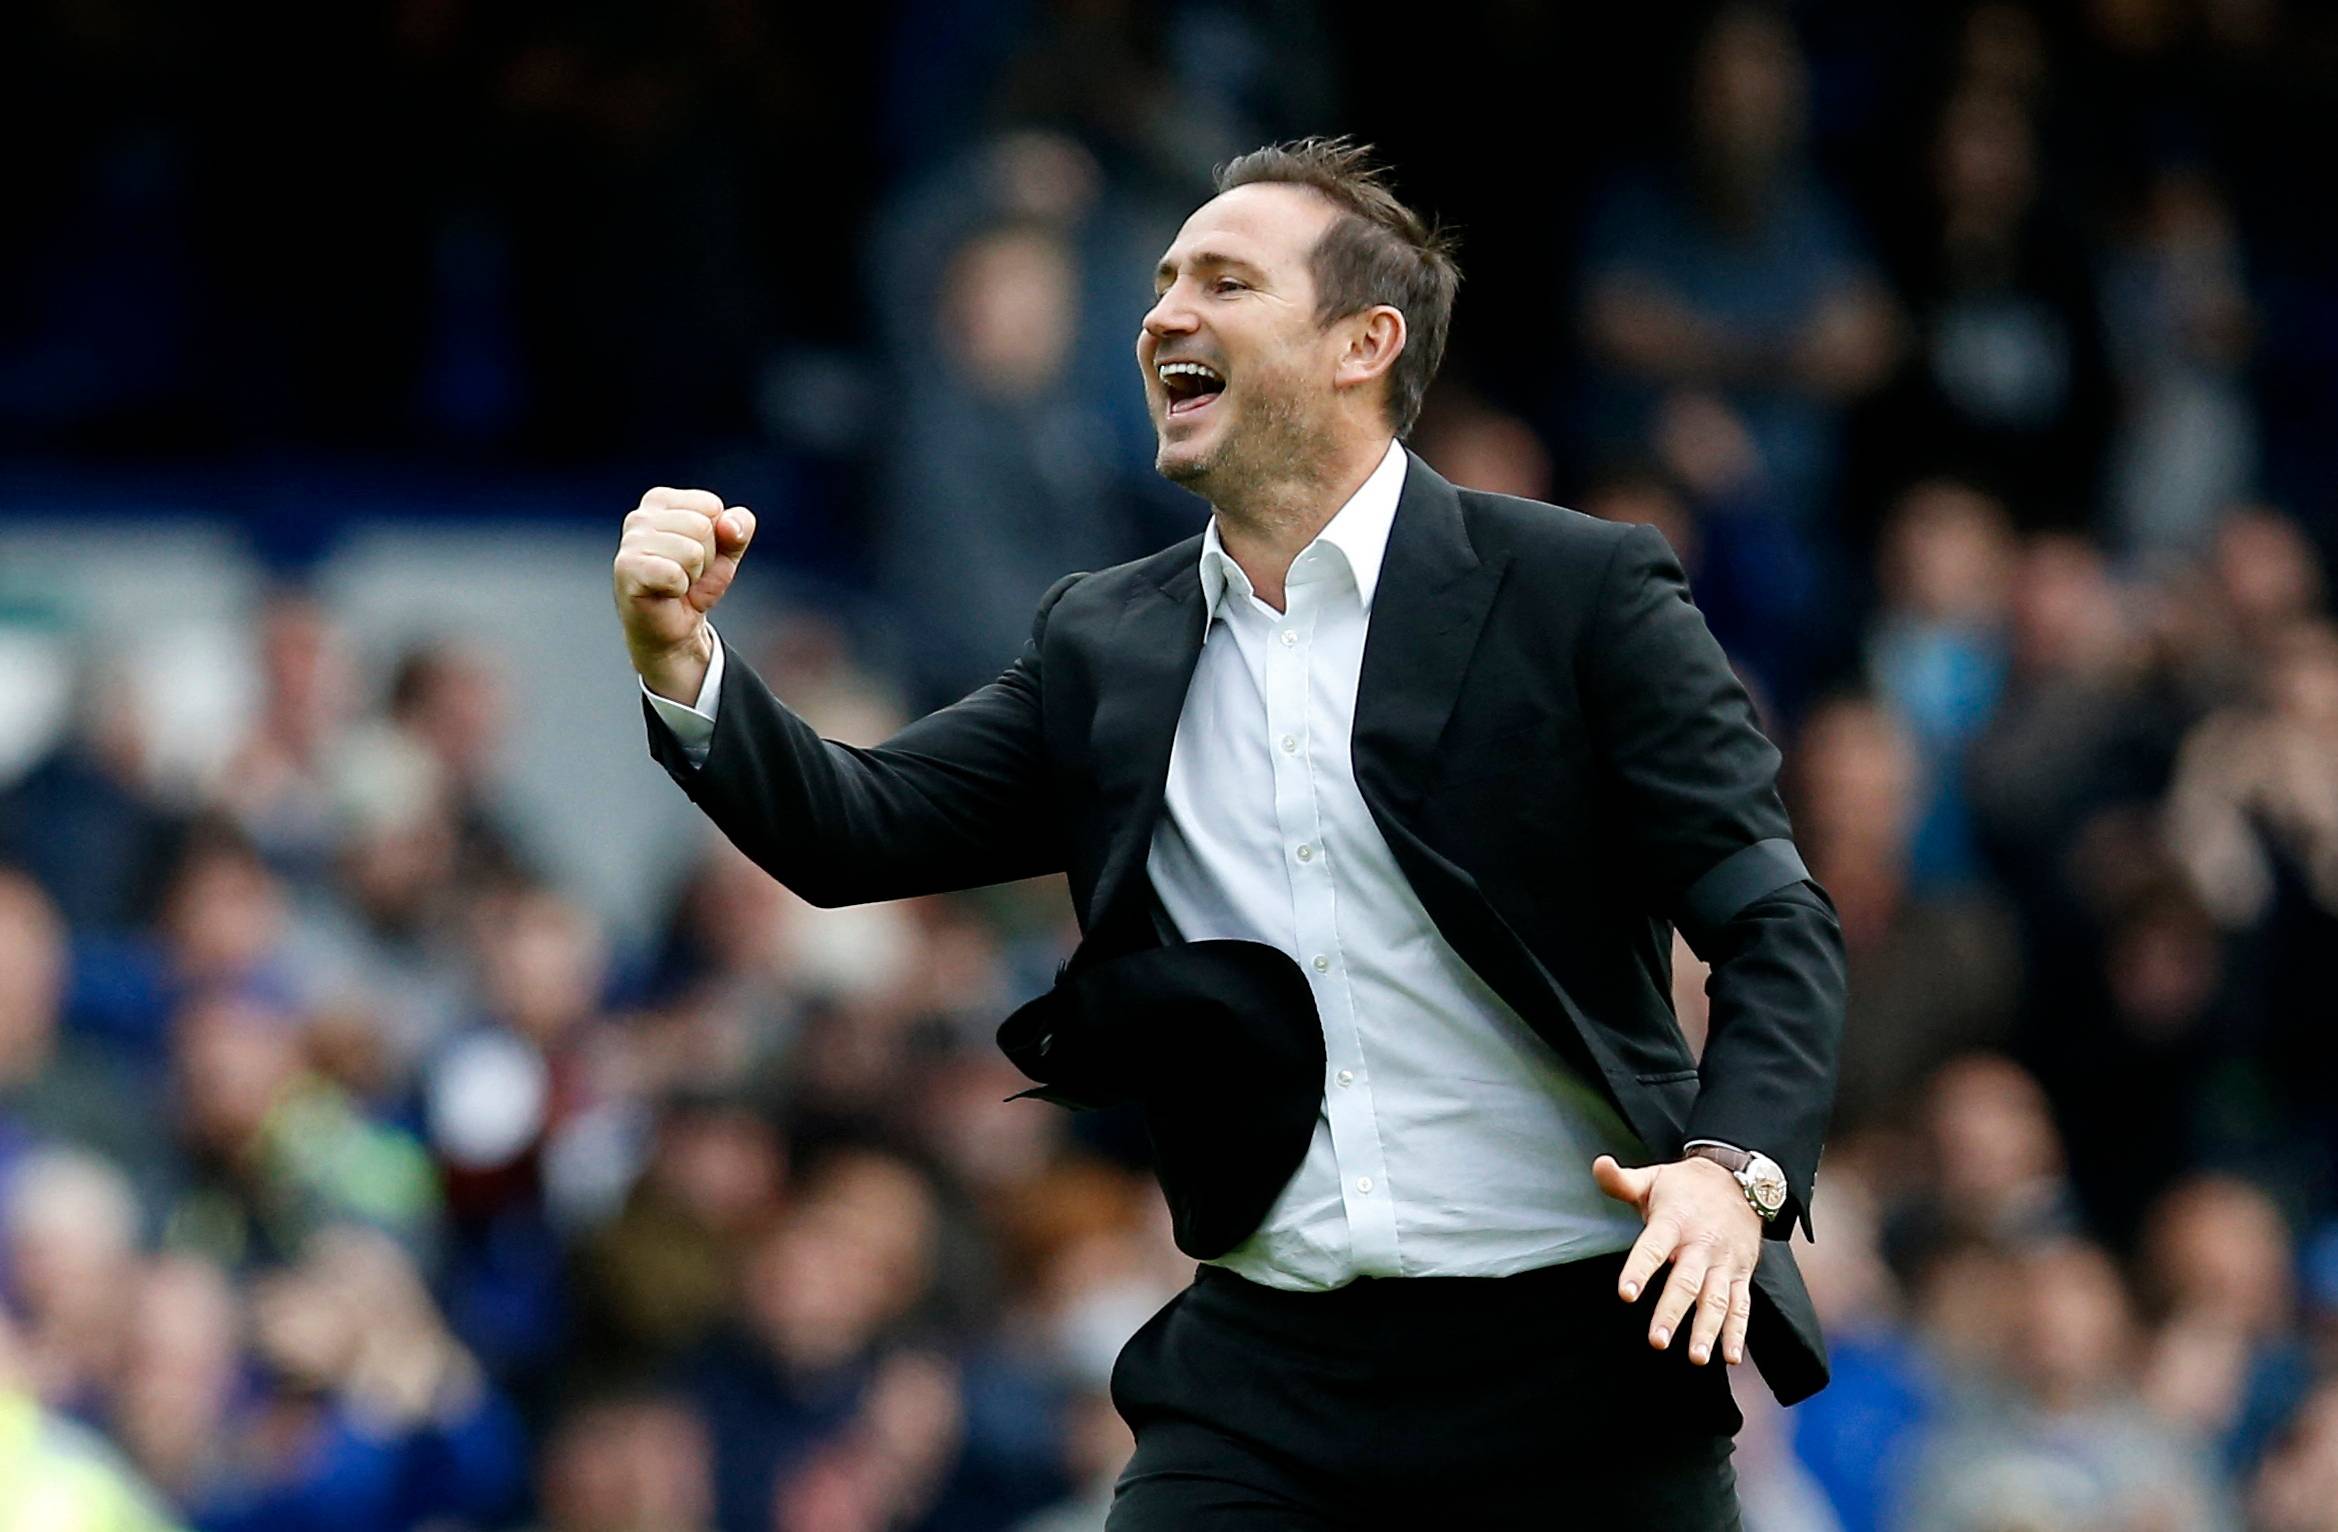 Everton manager Frank Lampard celebrates after the match